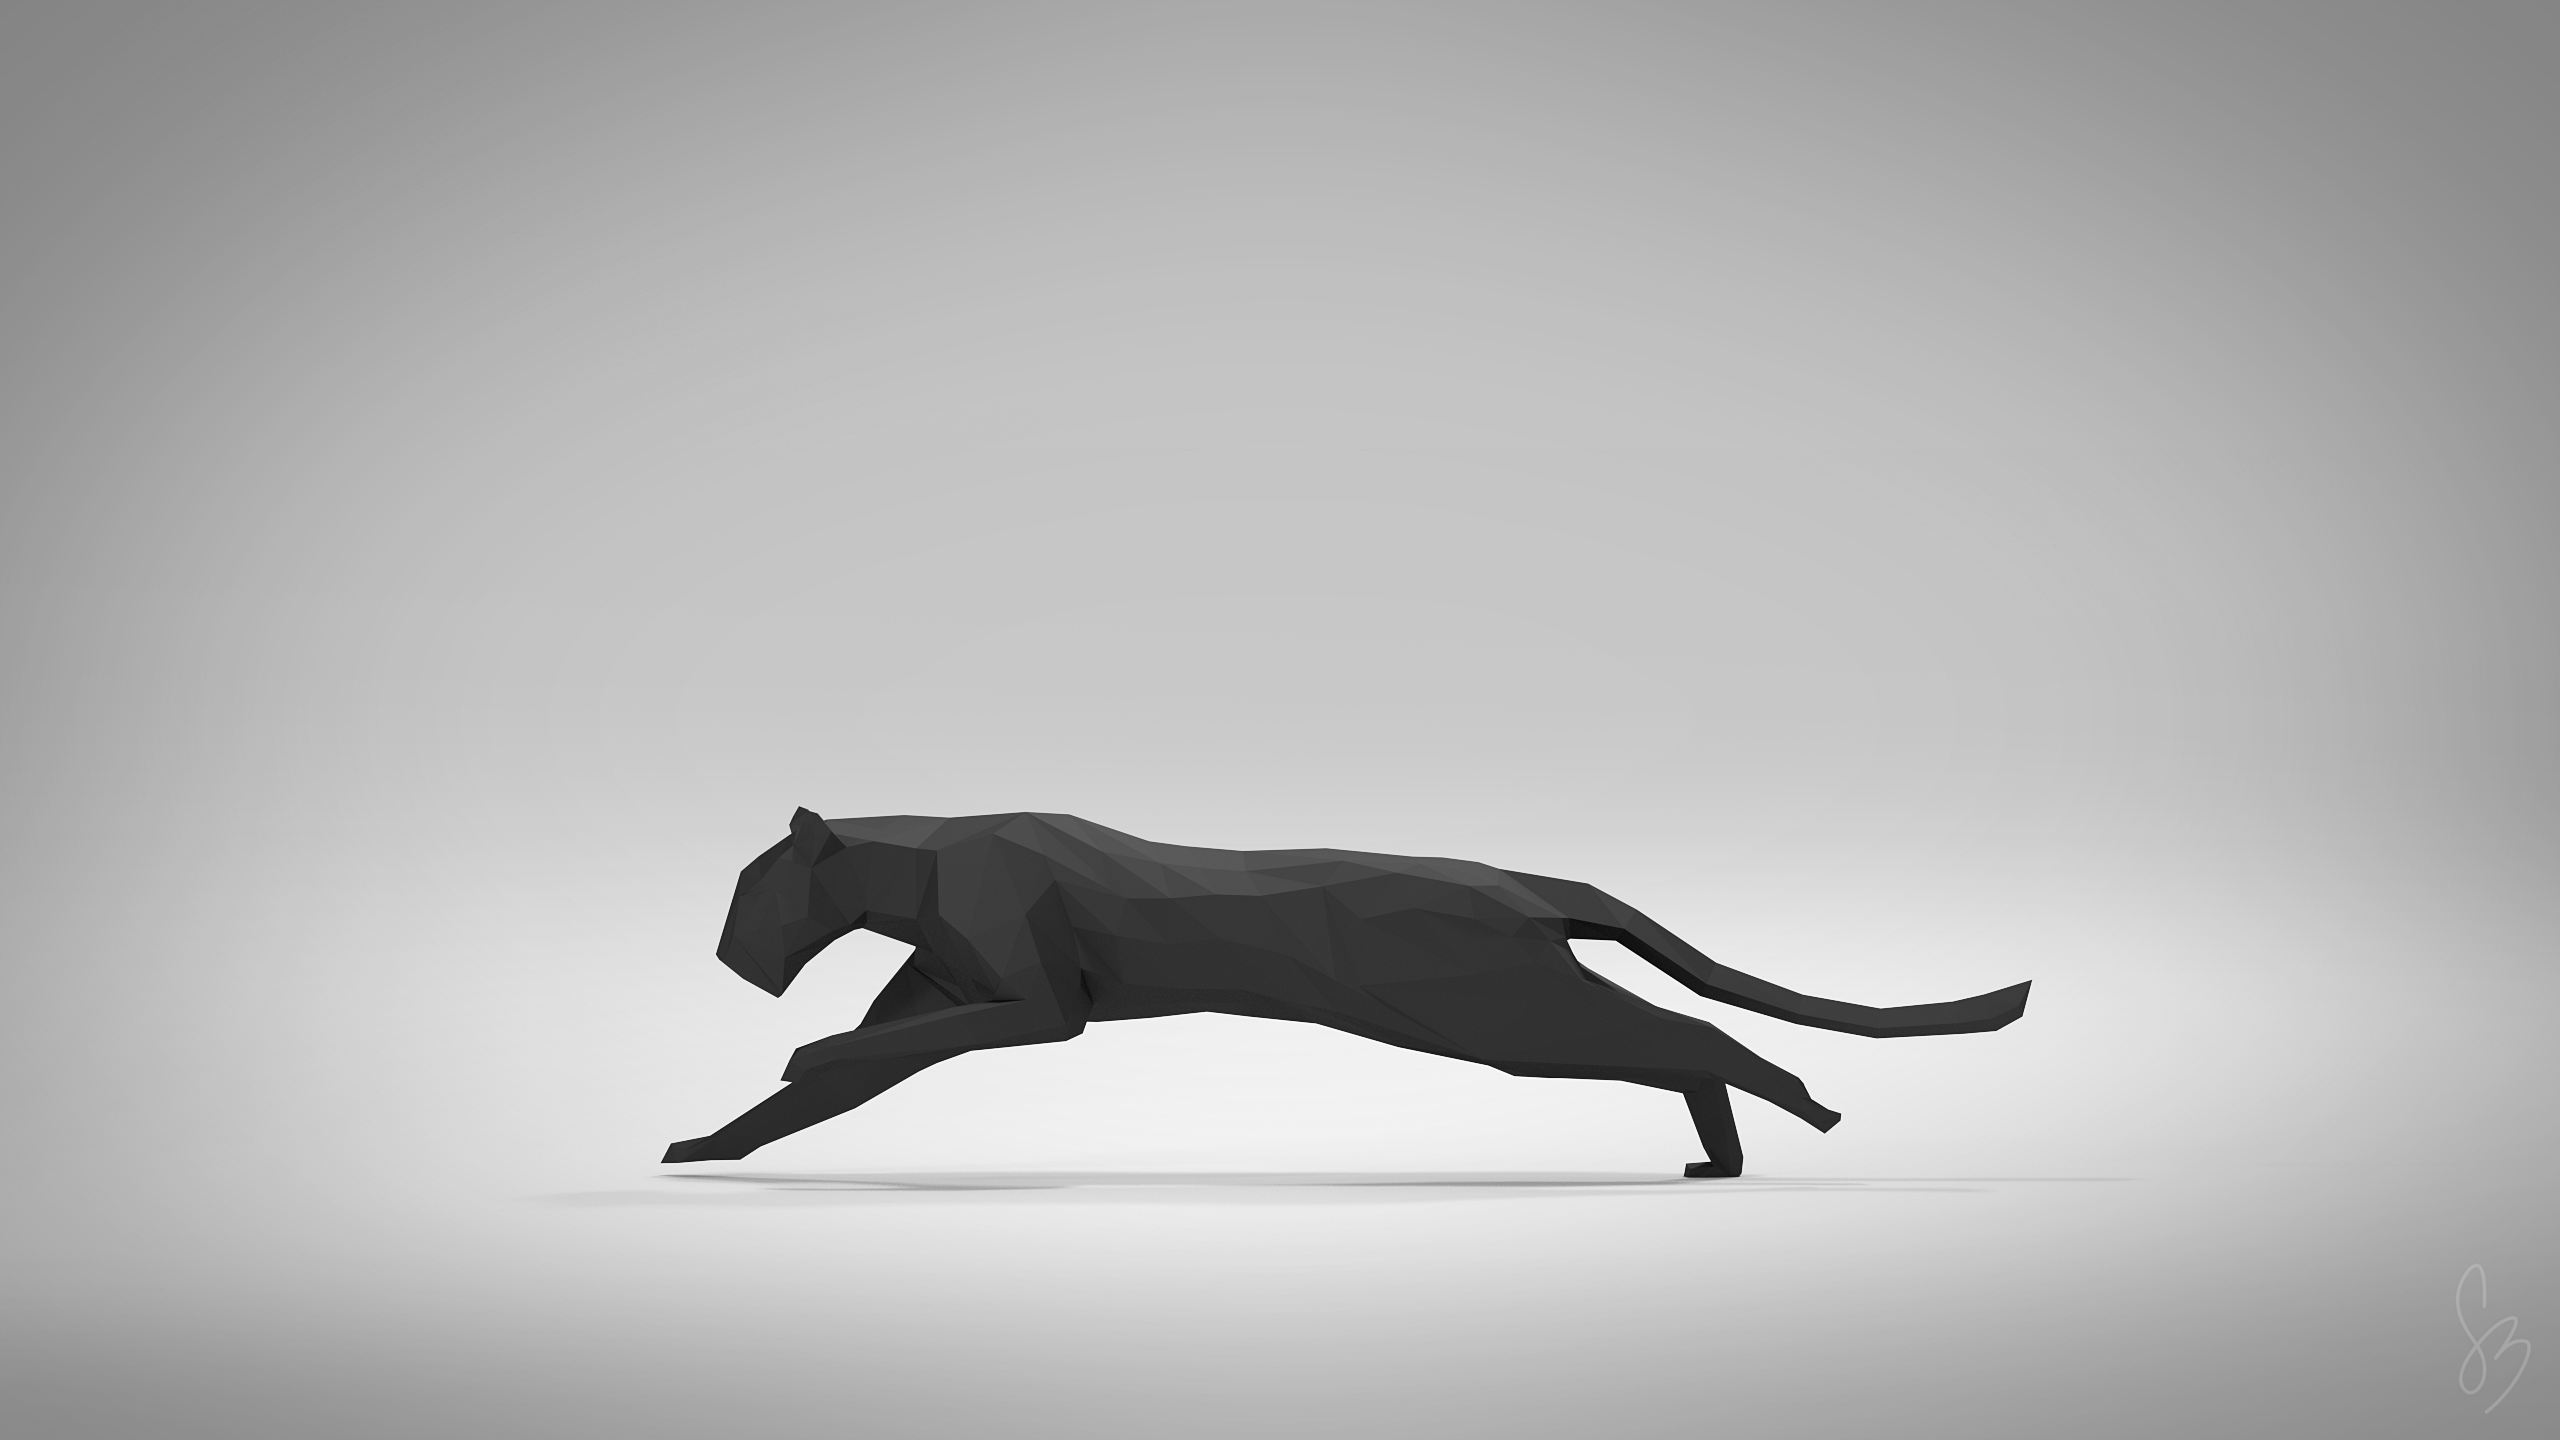 Black Panther [OC][2560x1440] Xpost R Low_poly